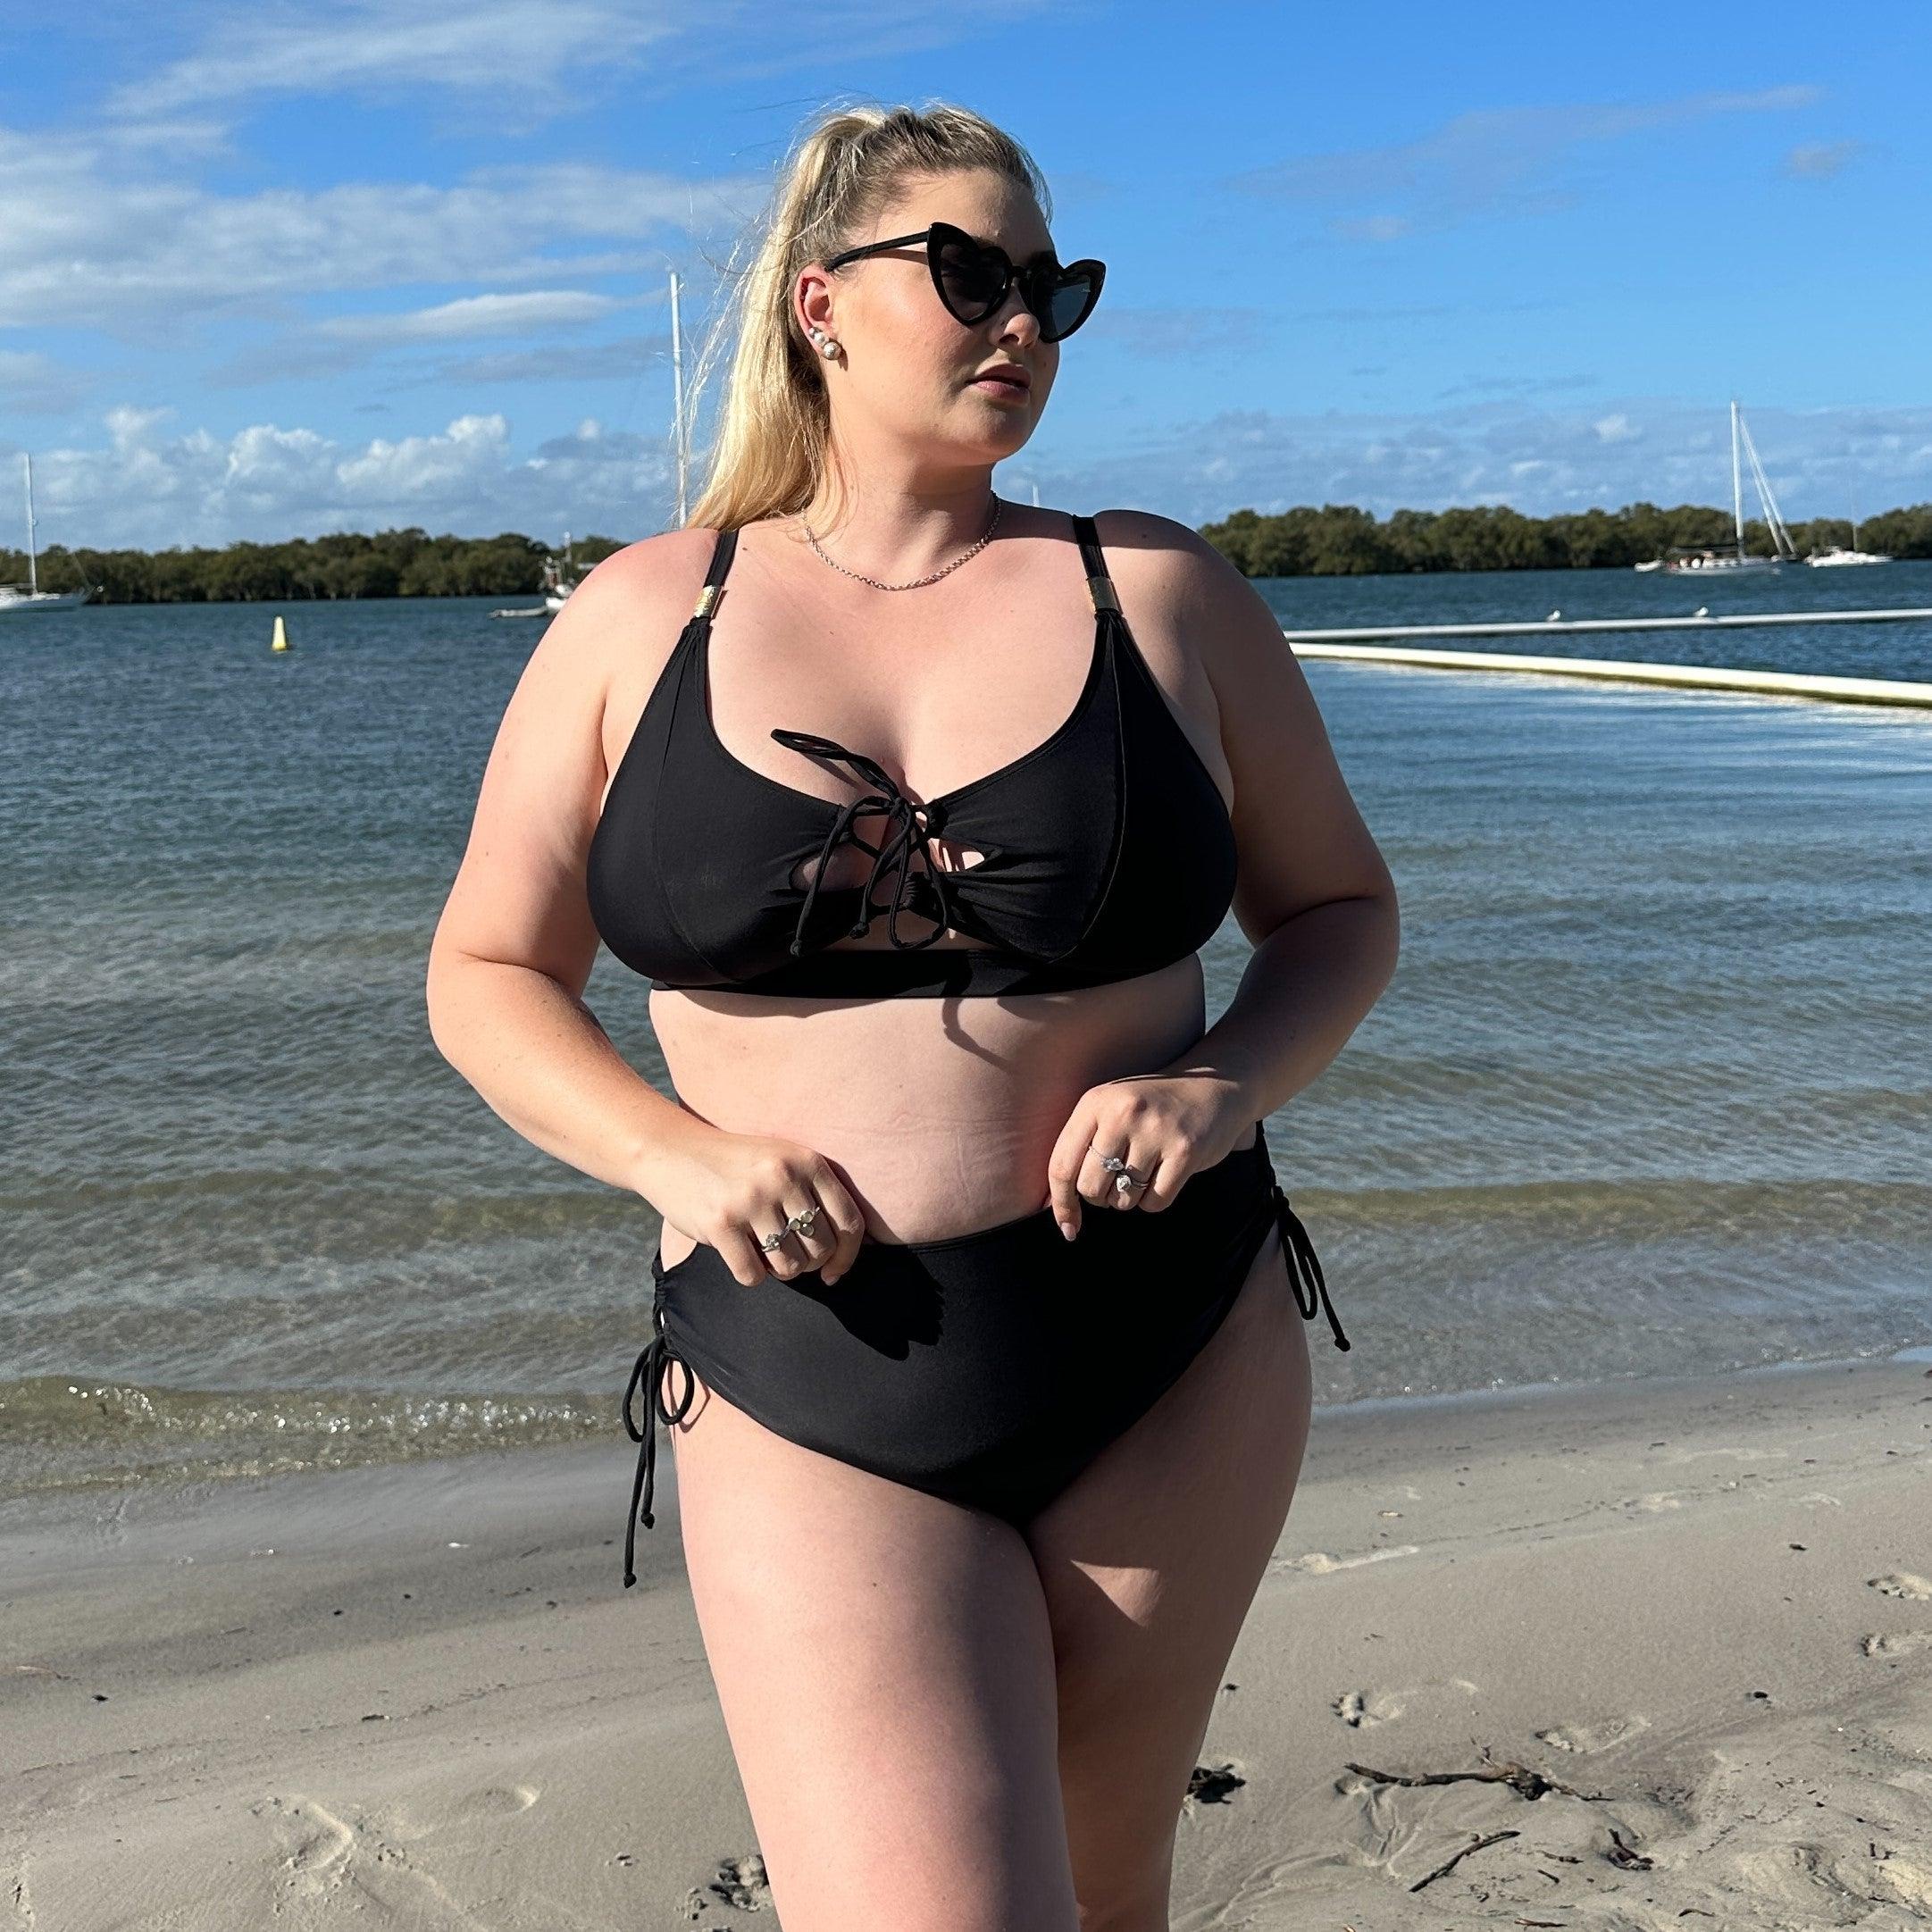 I'm a size 24 gal with big boobs - here's the perfect hack to wear